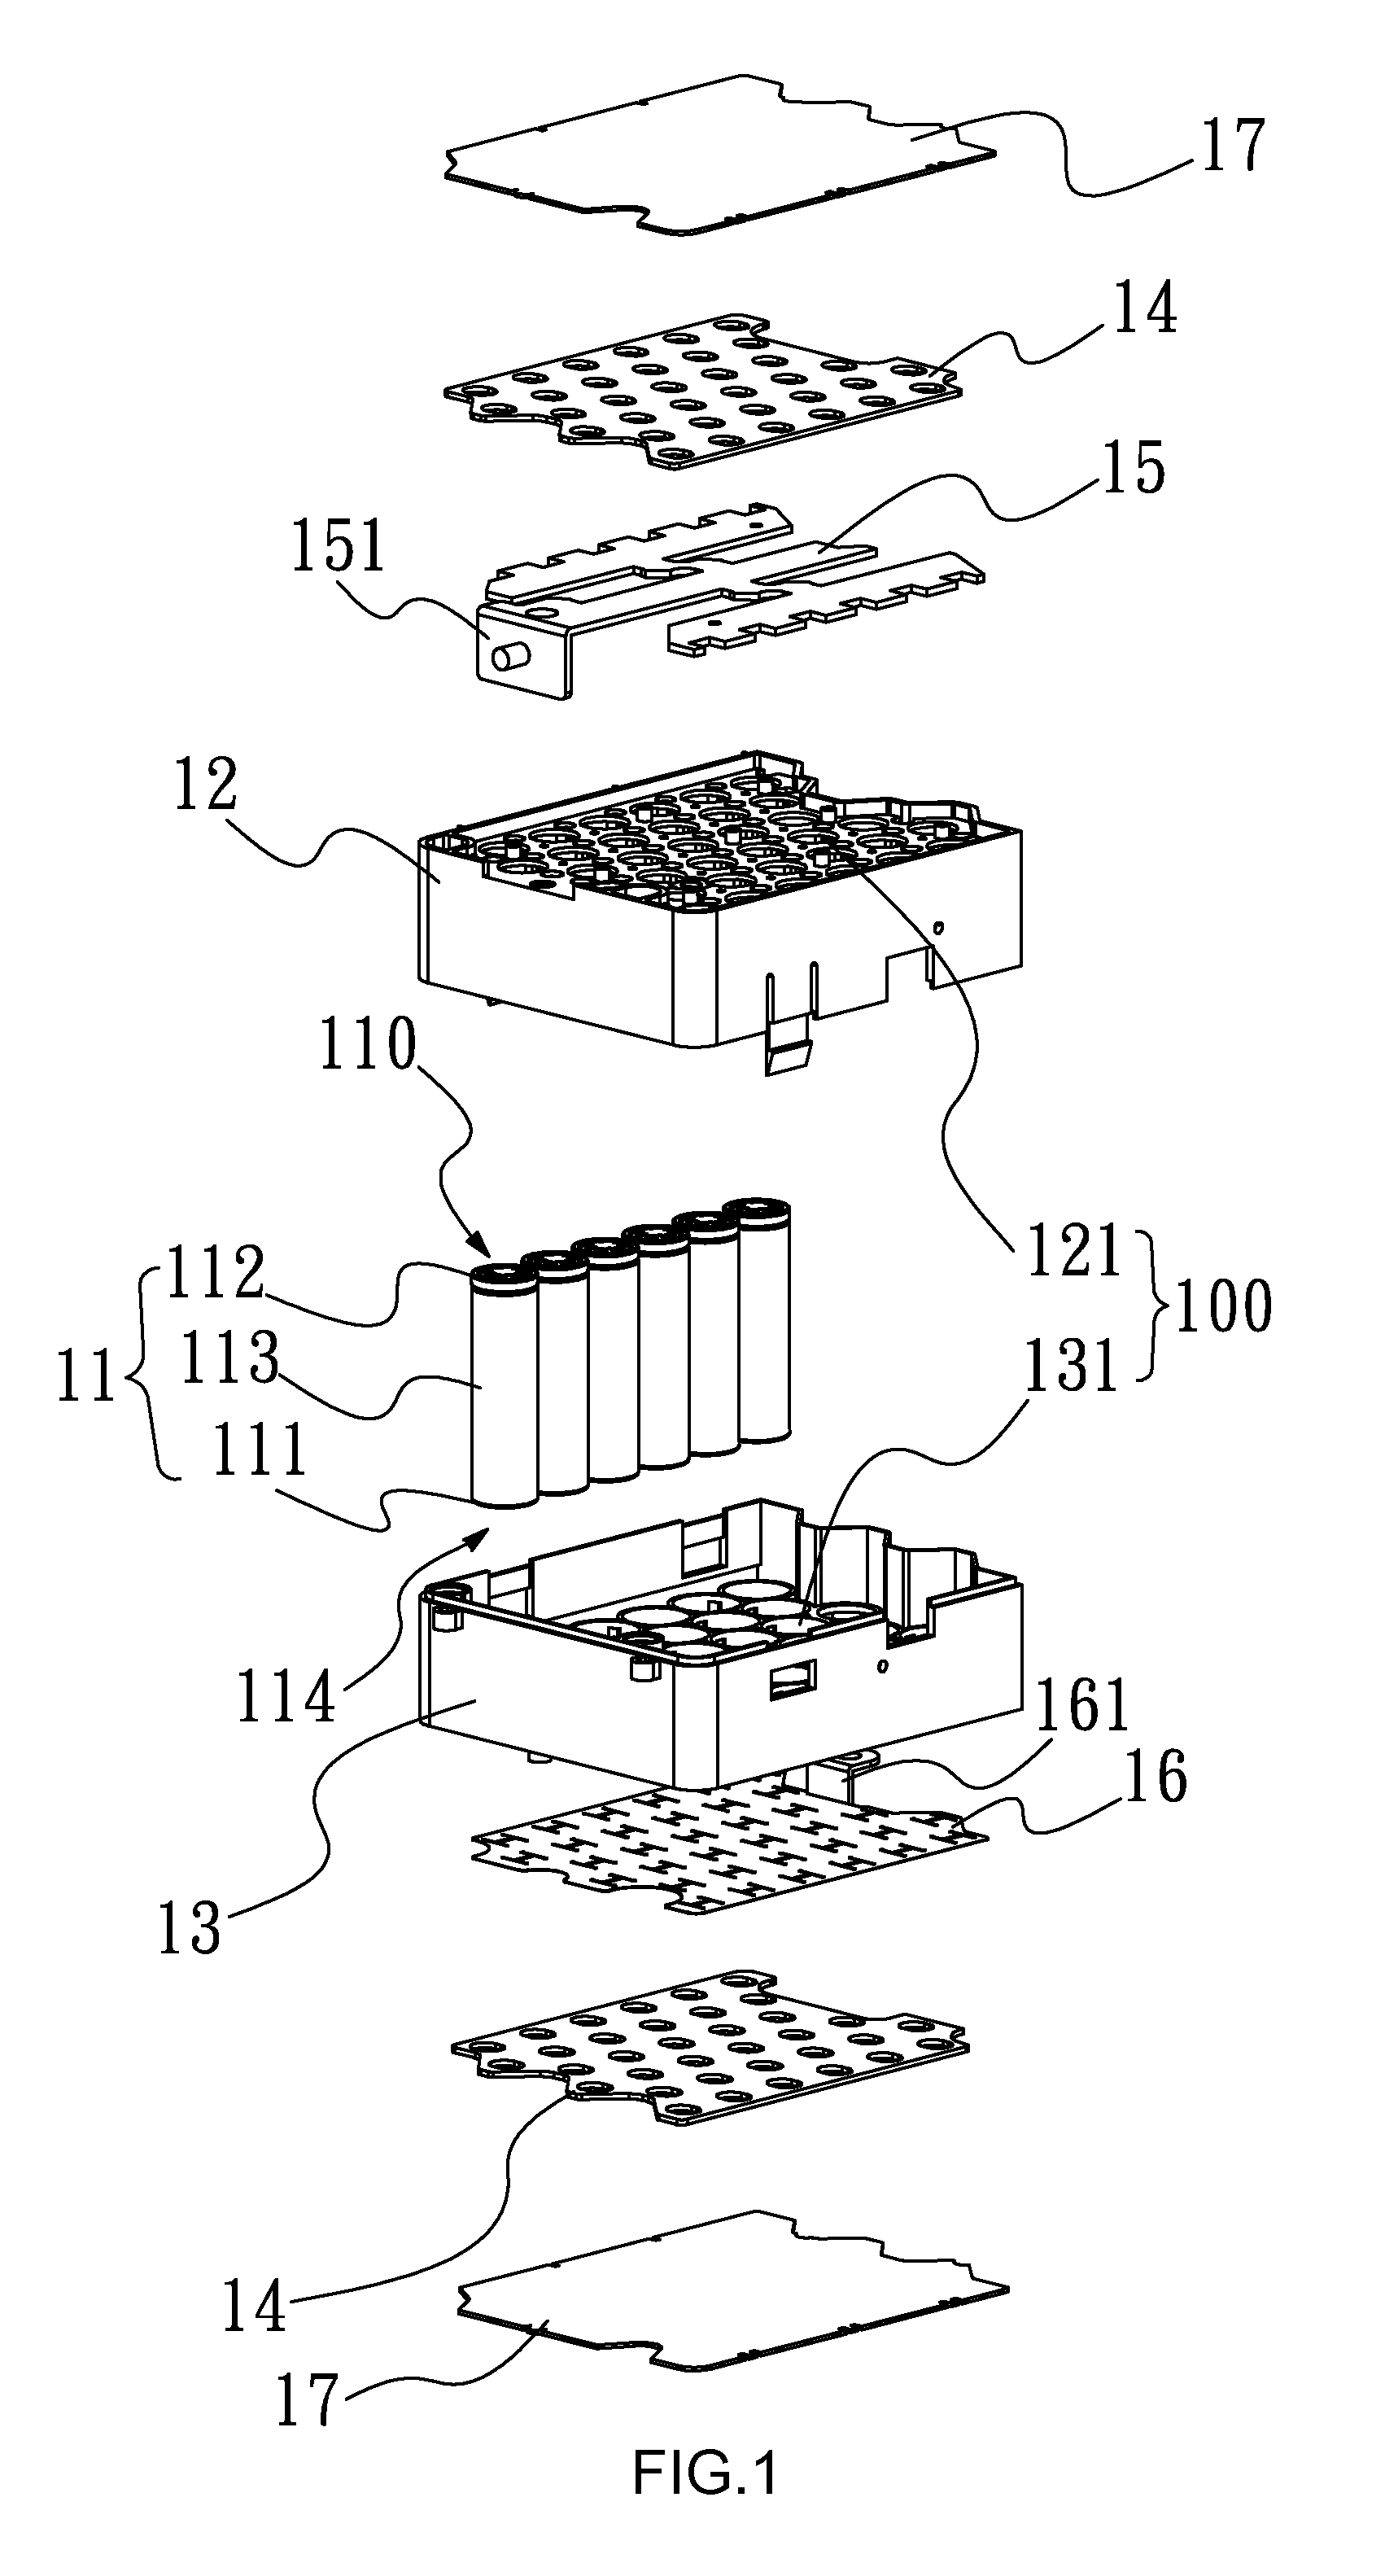 Battery assembly with adhesive stop mechanism